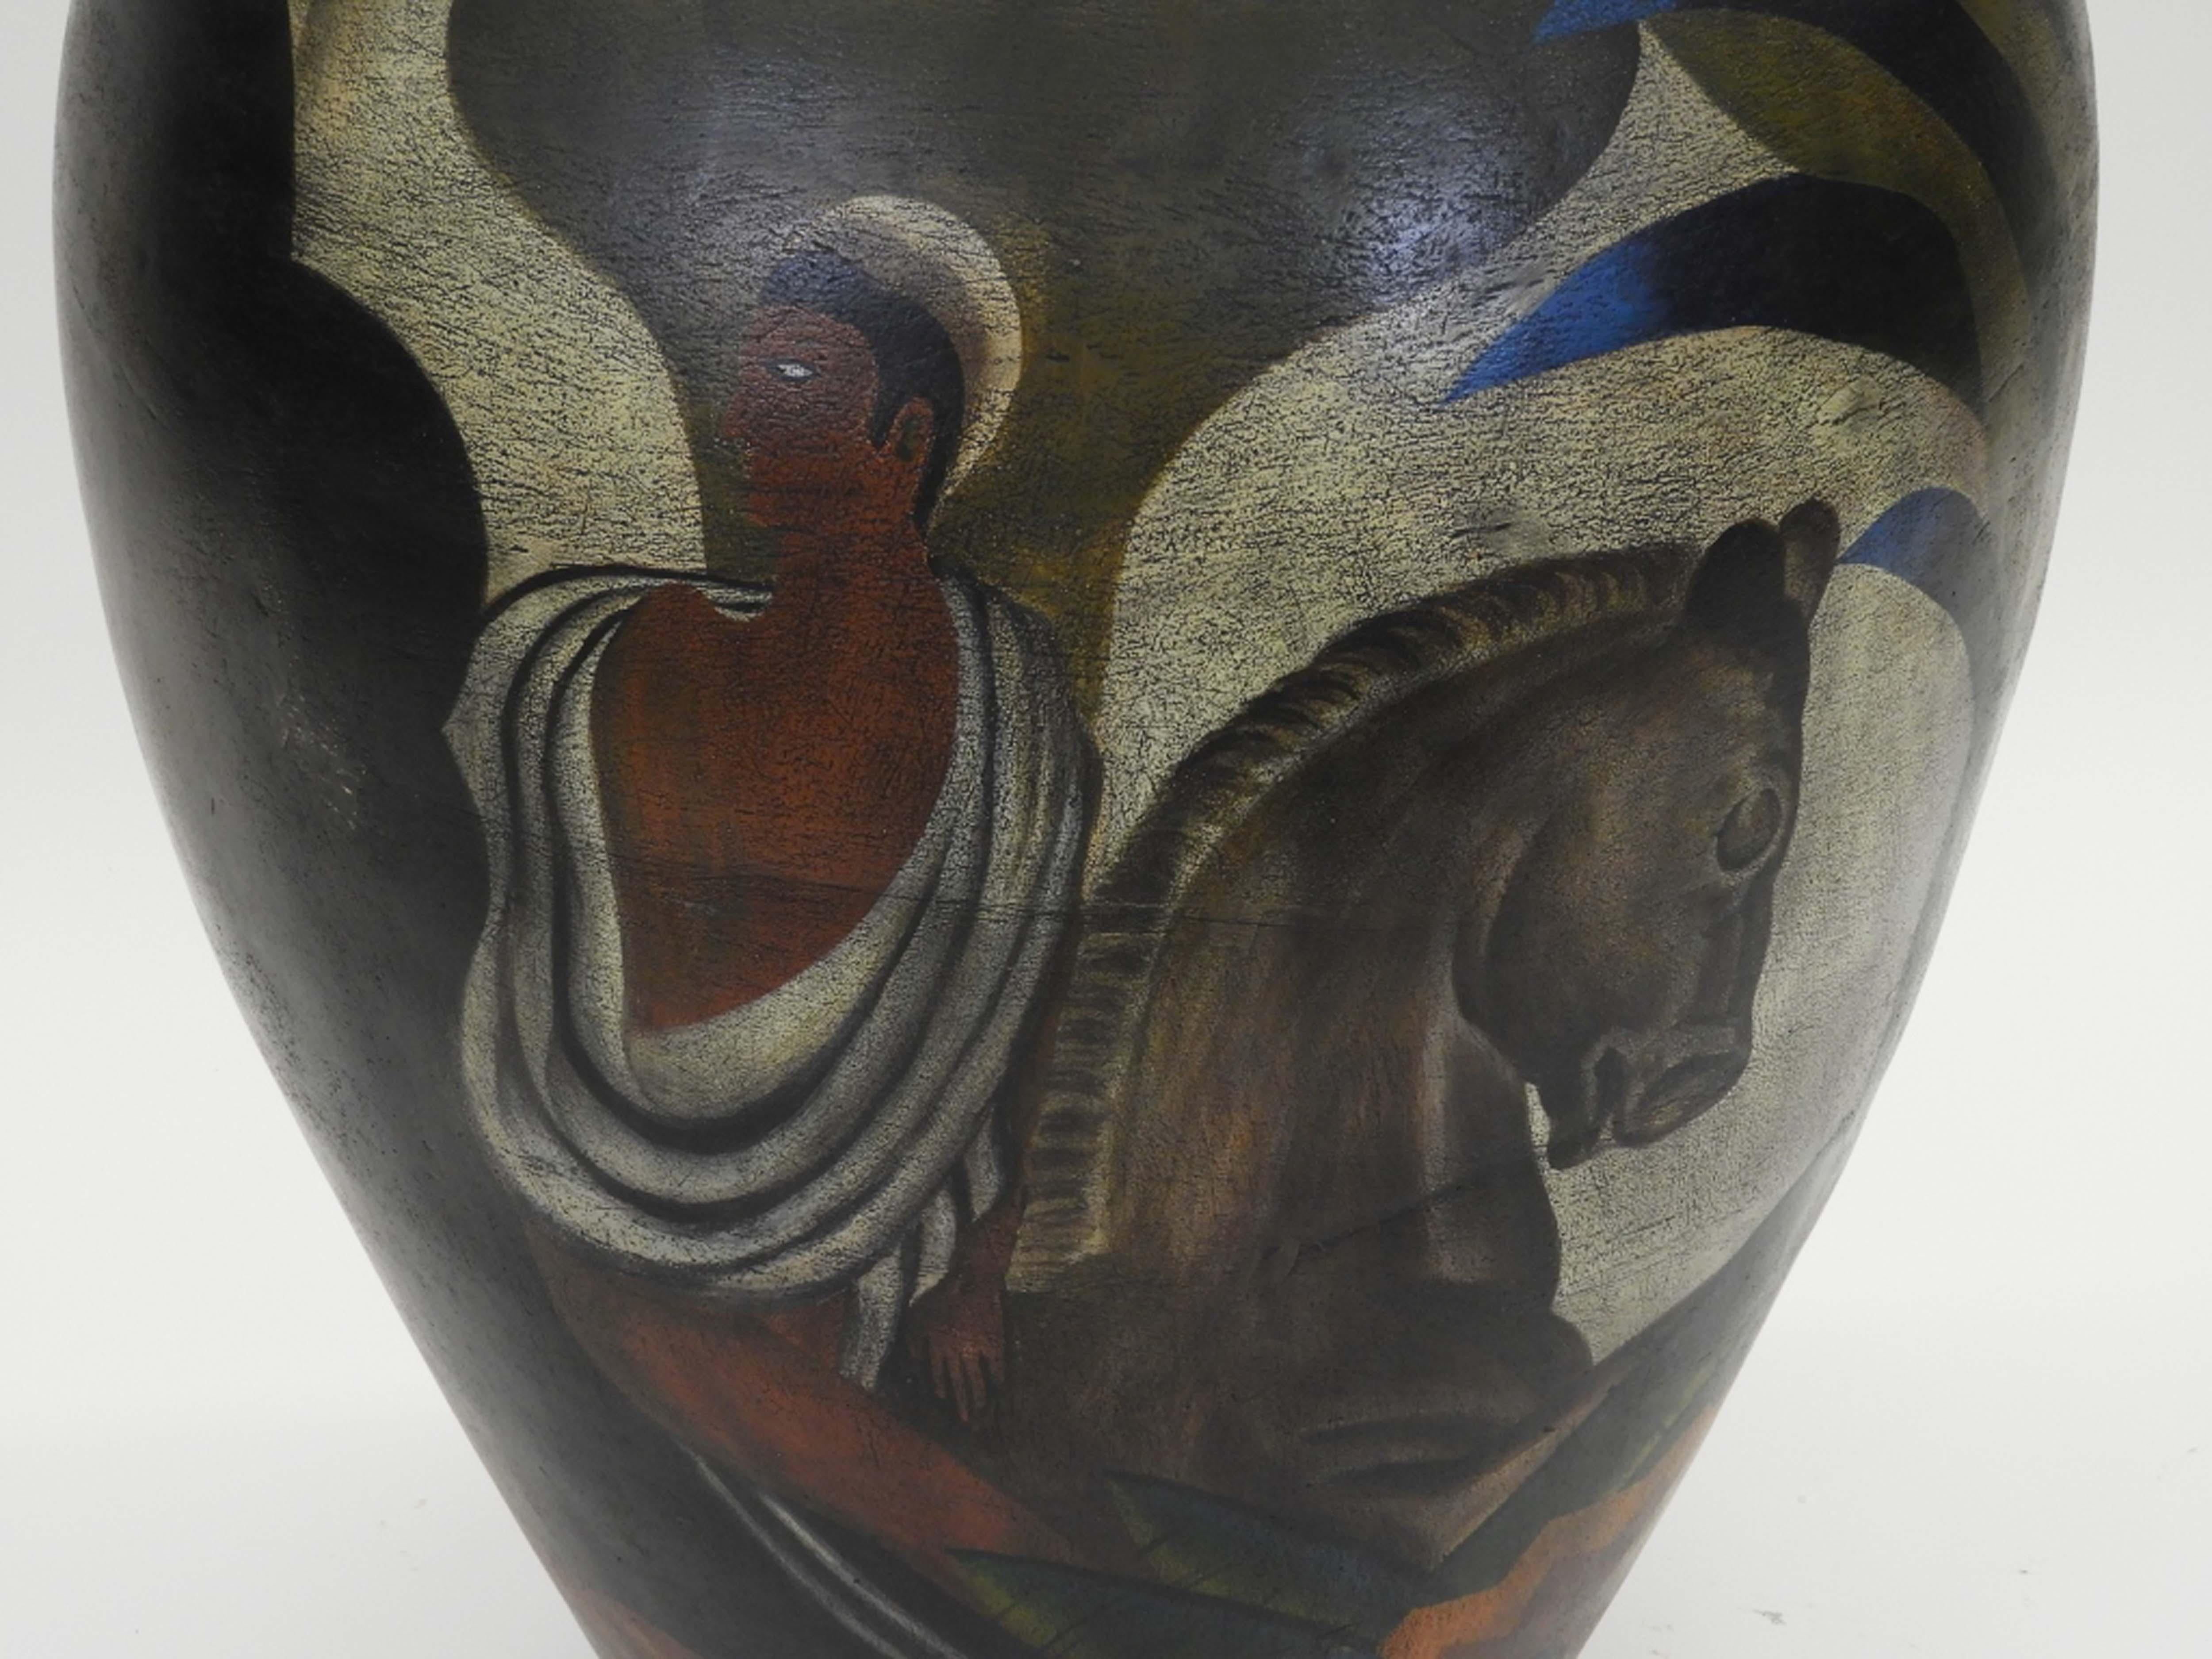 North American Large and Heavy Massive Floor Vase of Modern Art Pottery in Art Deco Style For Sale